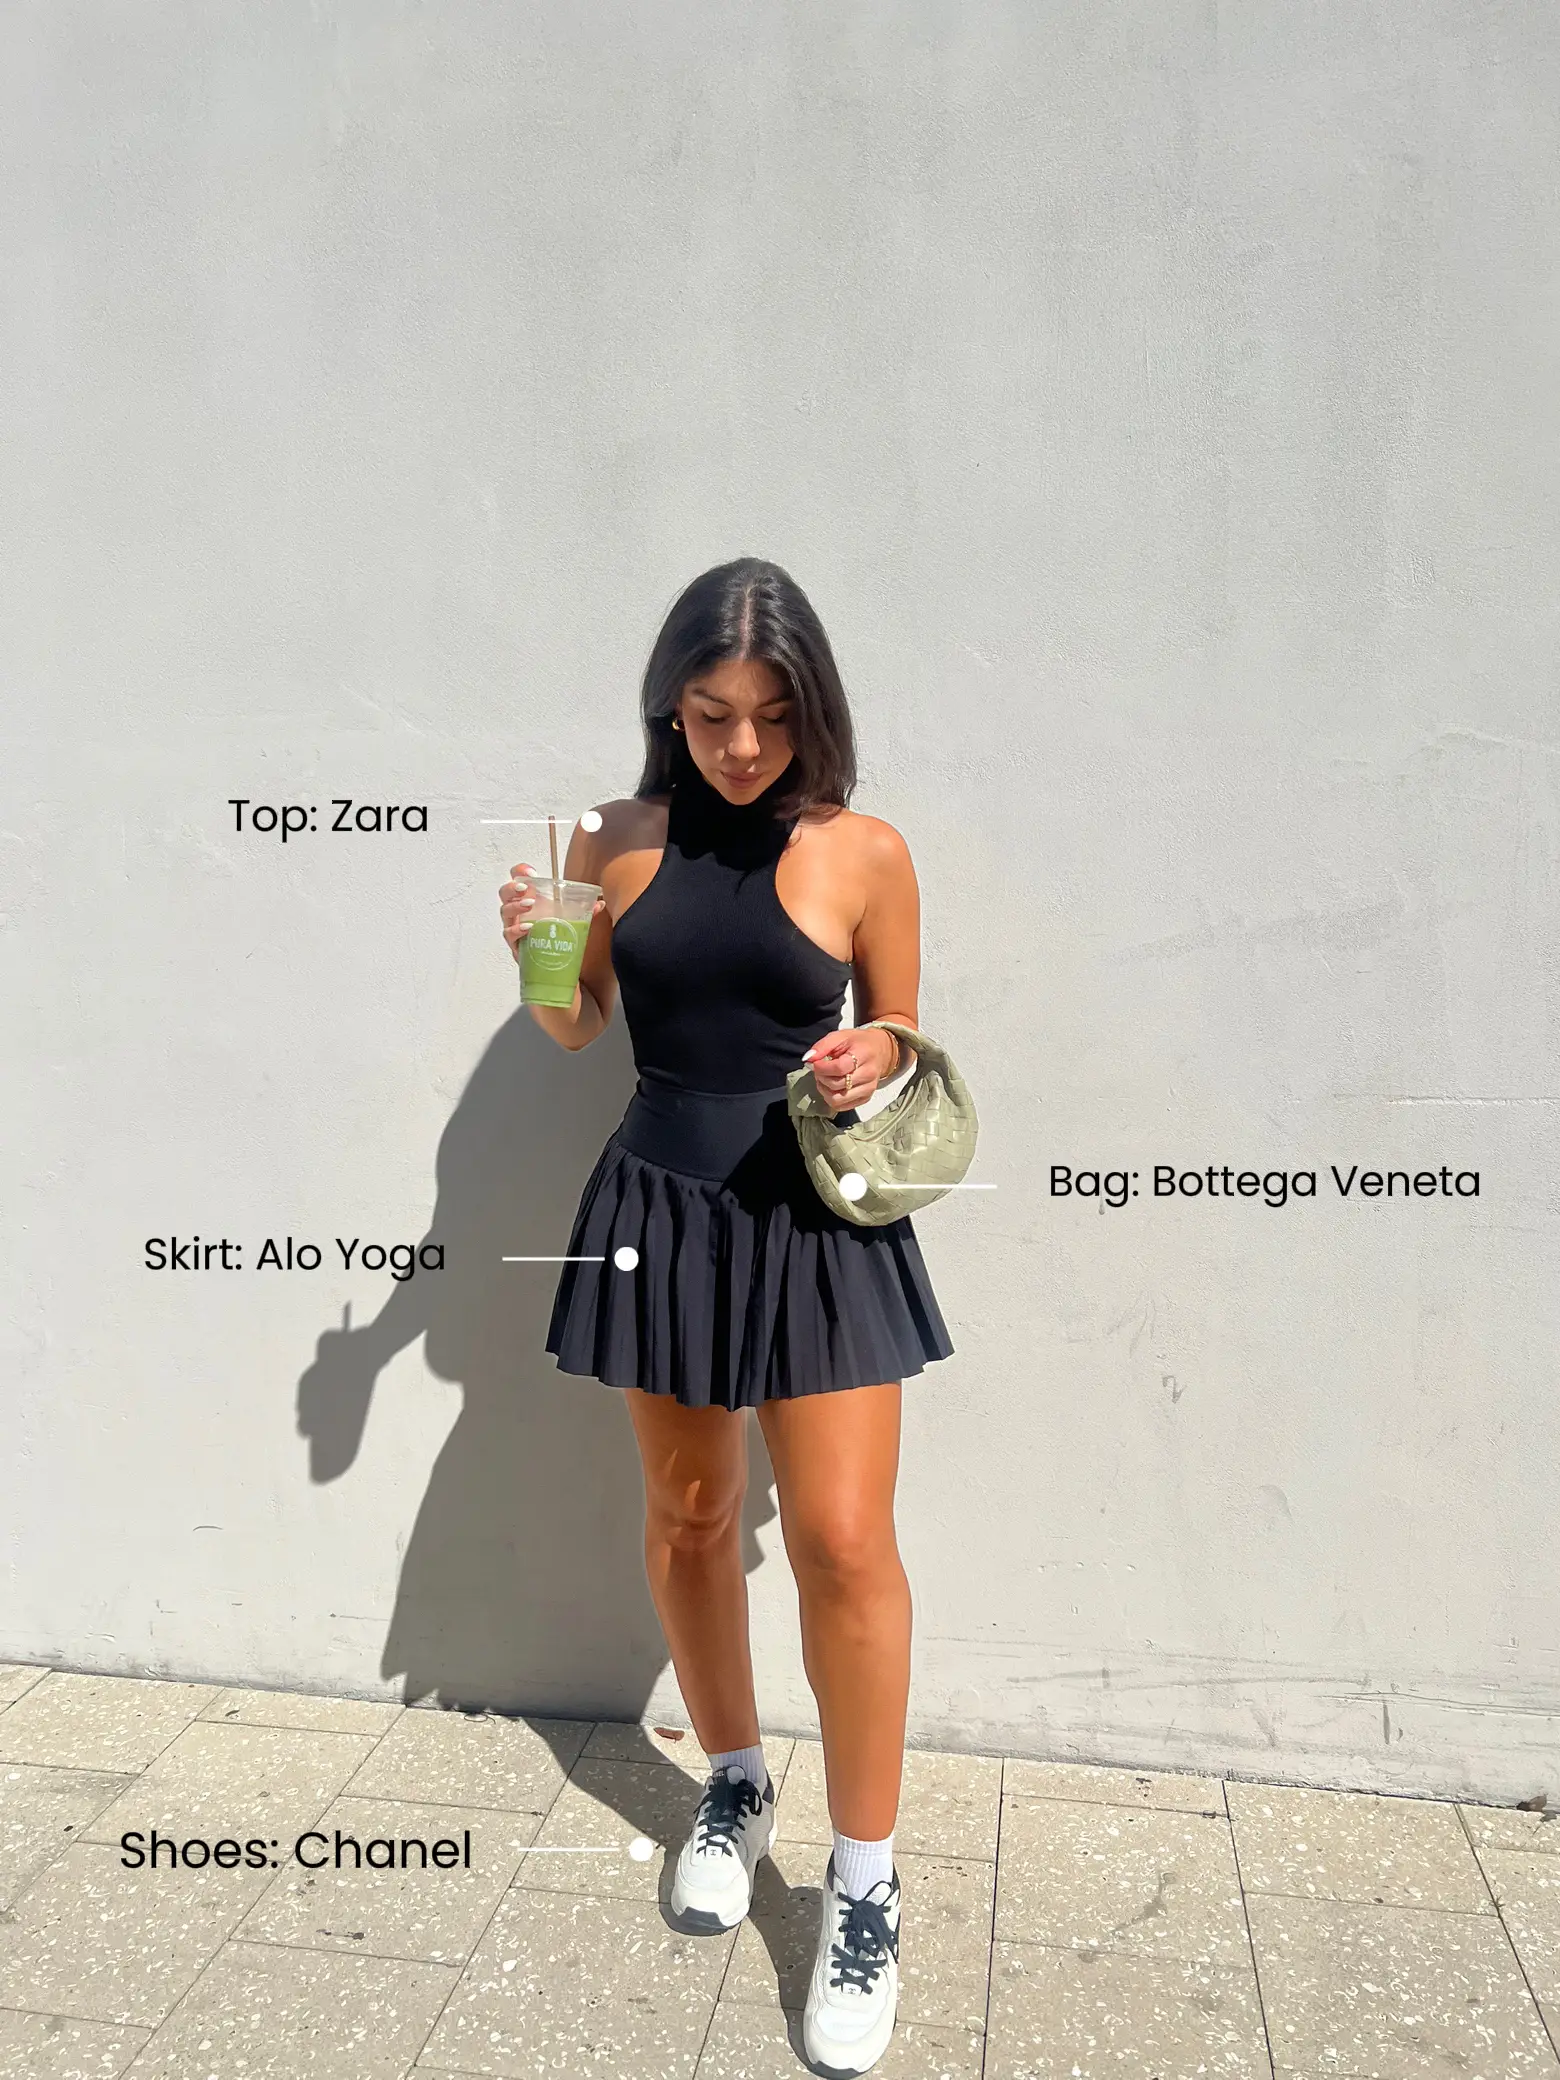 Green juice run outfit details 🥰🥬, Gallery posted by Daniella